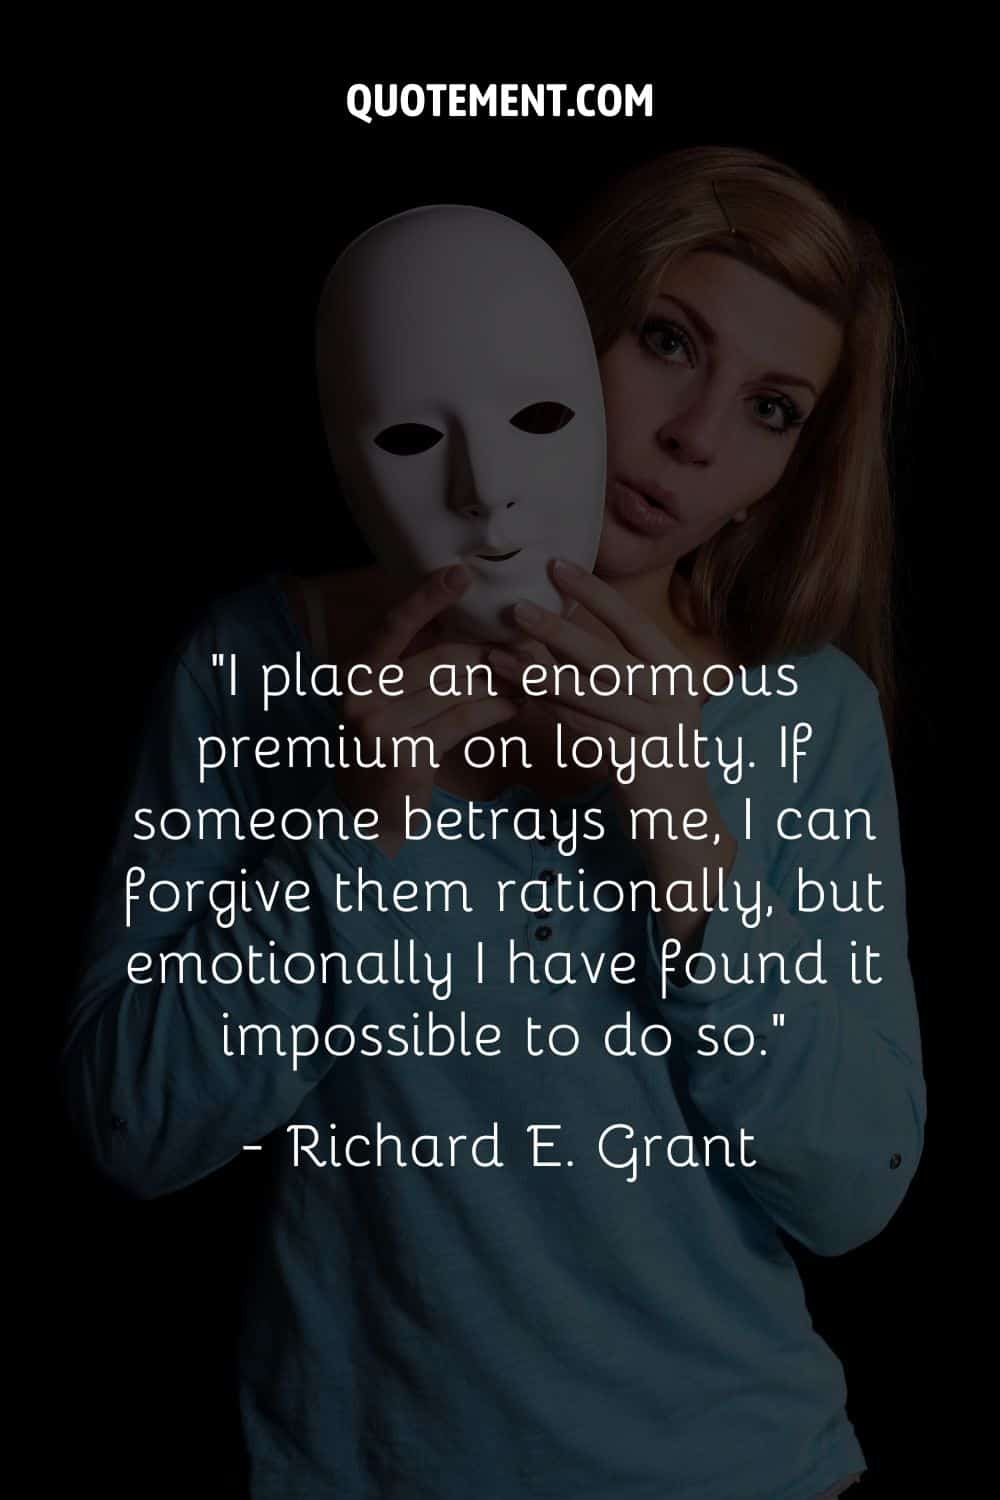 “I place an enormous premium on loyalty. If someone betrays me, I can forgive them rationally, but emotionally I have found it impossible to do so.” ― Richard E. Grant